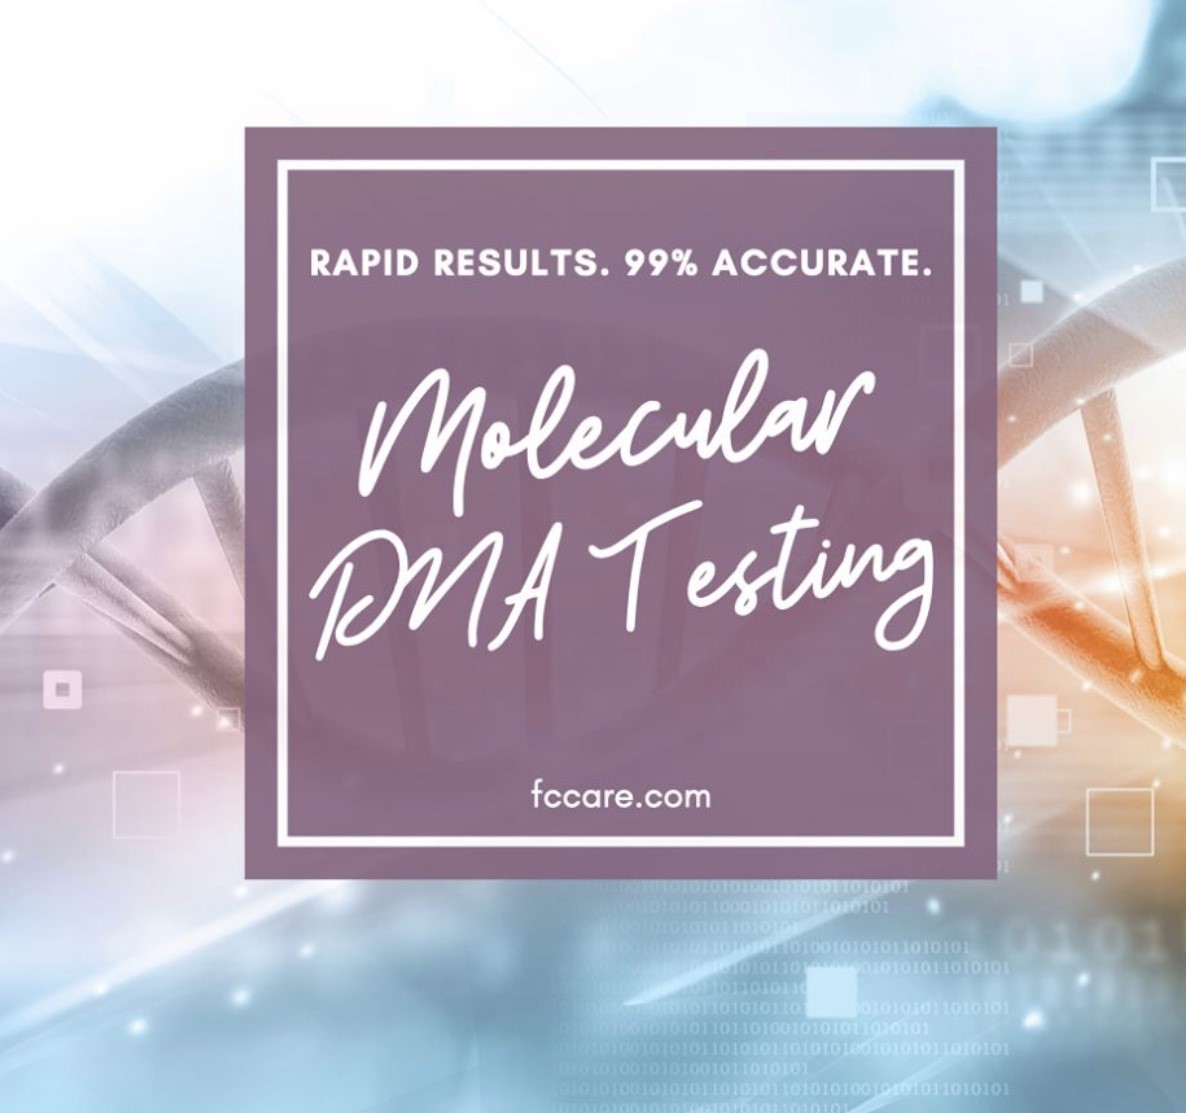 Get Accurate Results For Flu And Strep
Get 99% Accurate Results With Molecular DNA Testing